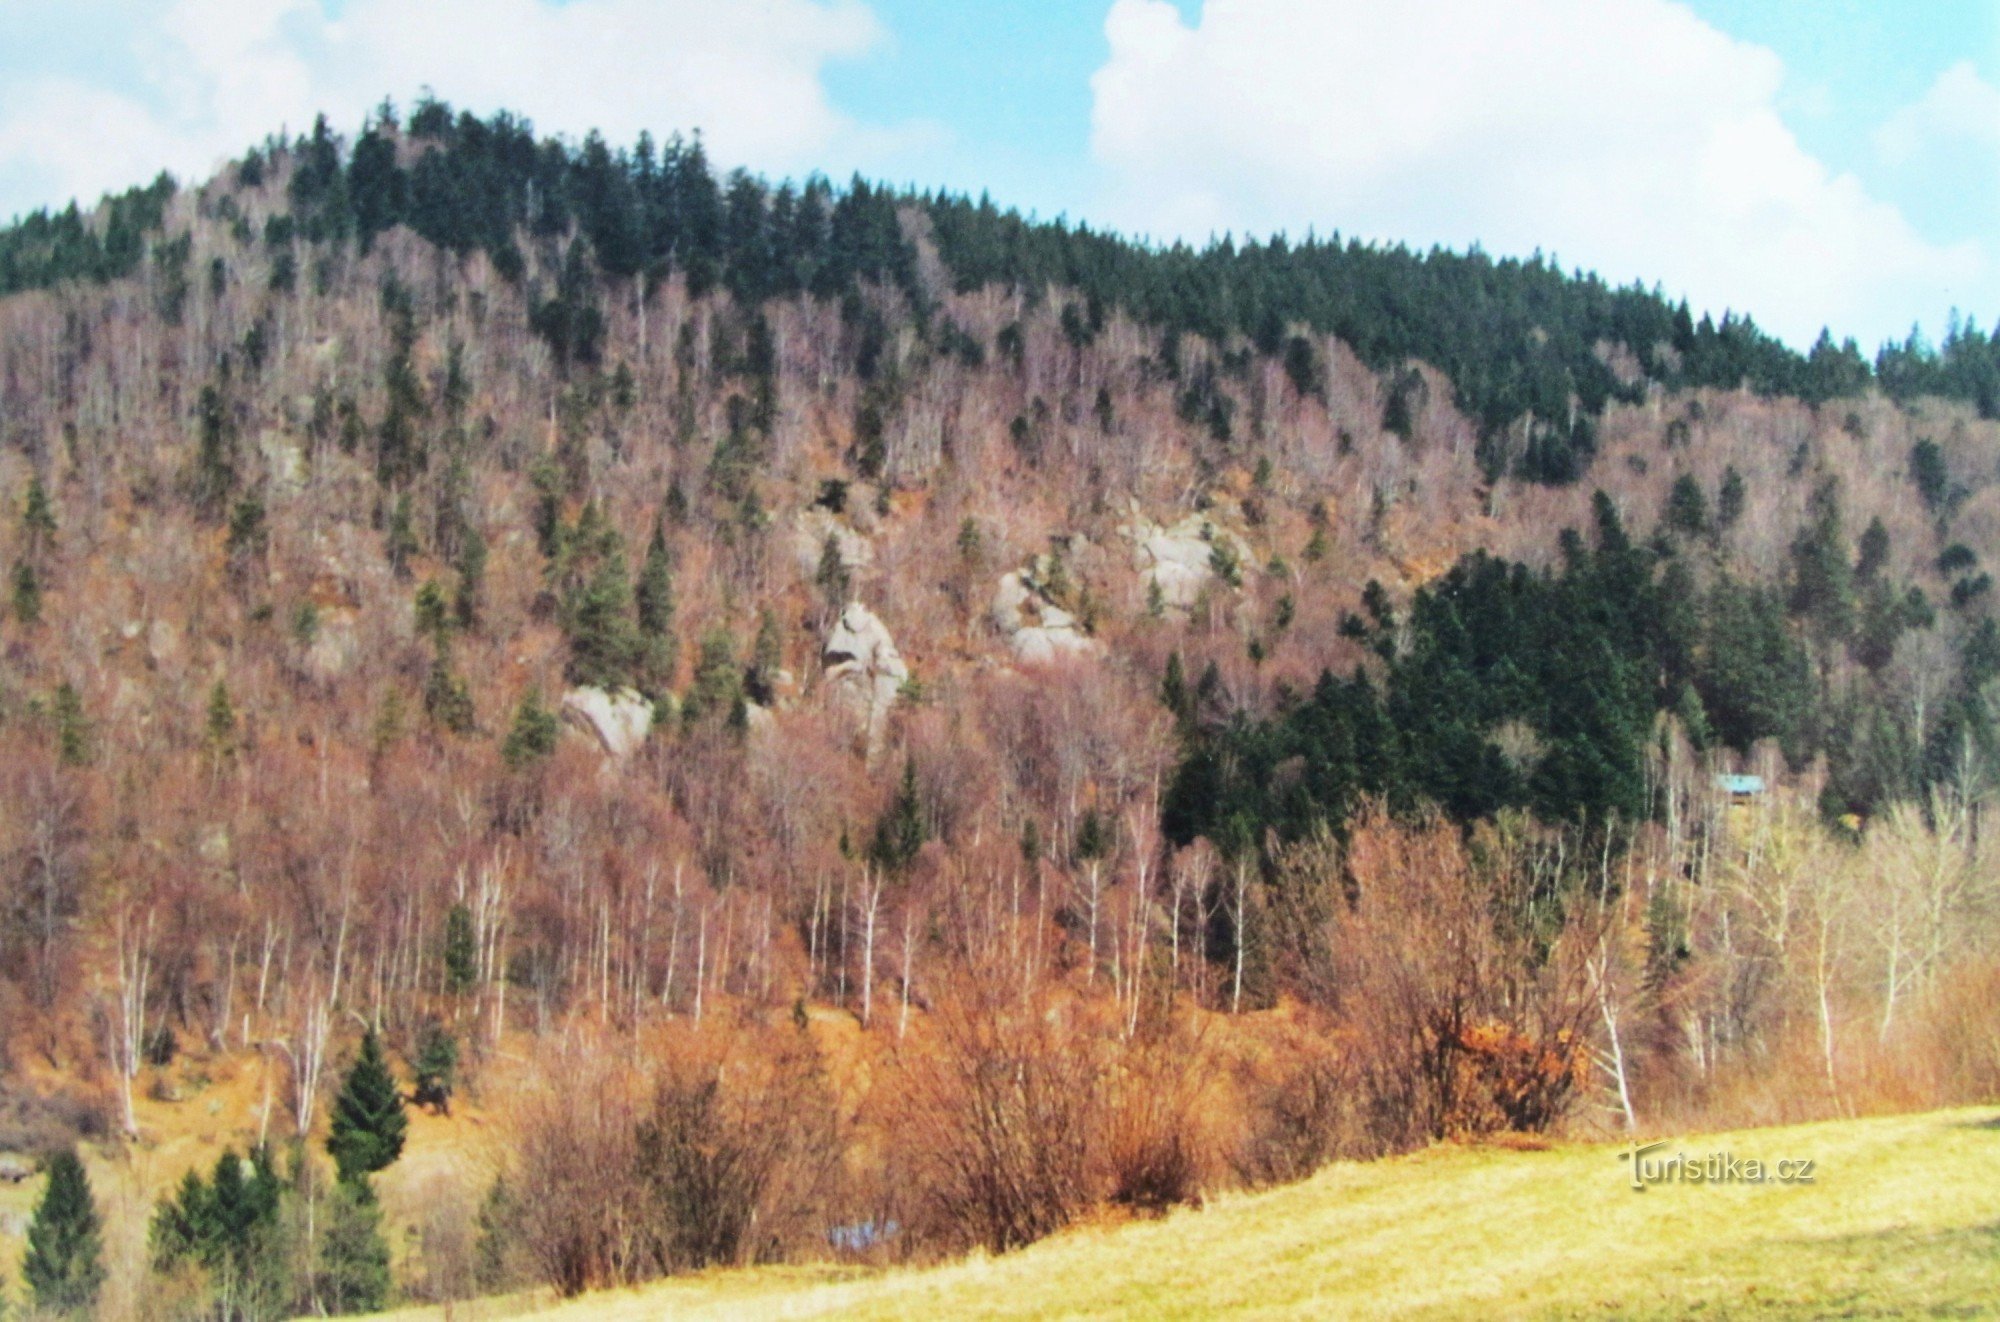 Rocks on the slope of Hradisk at the end of the valley